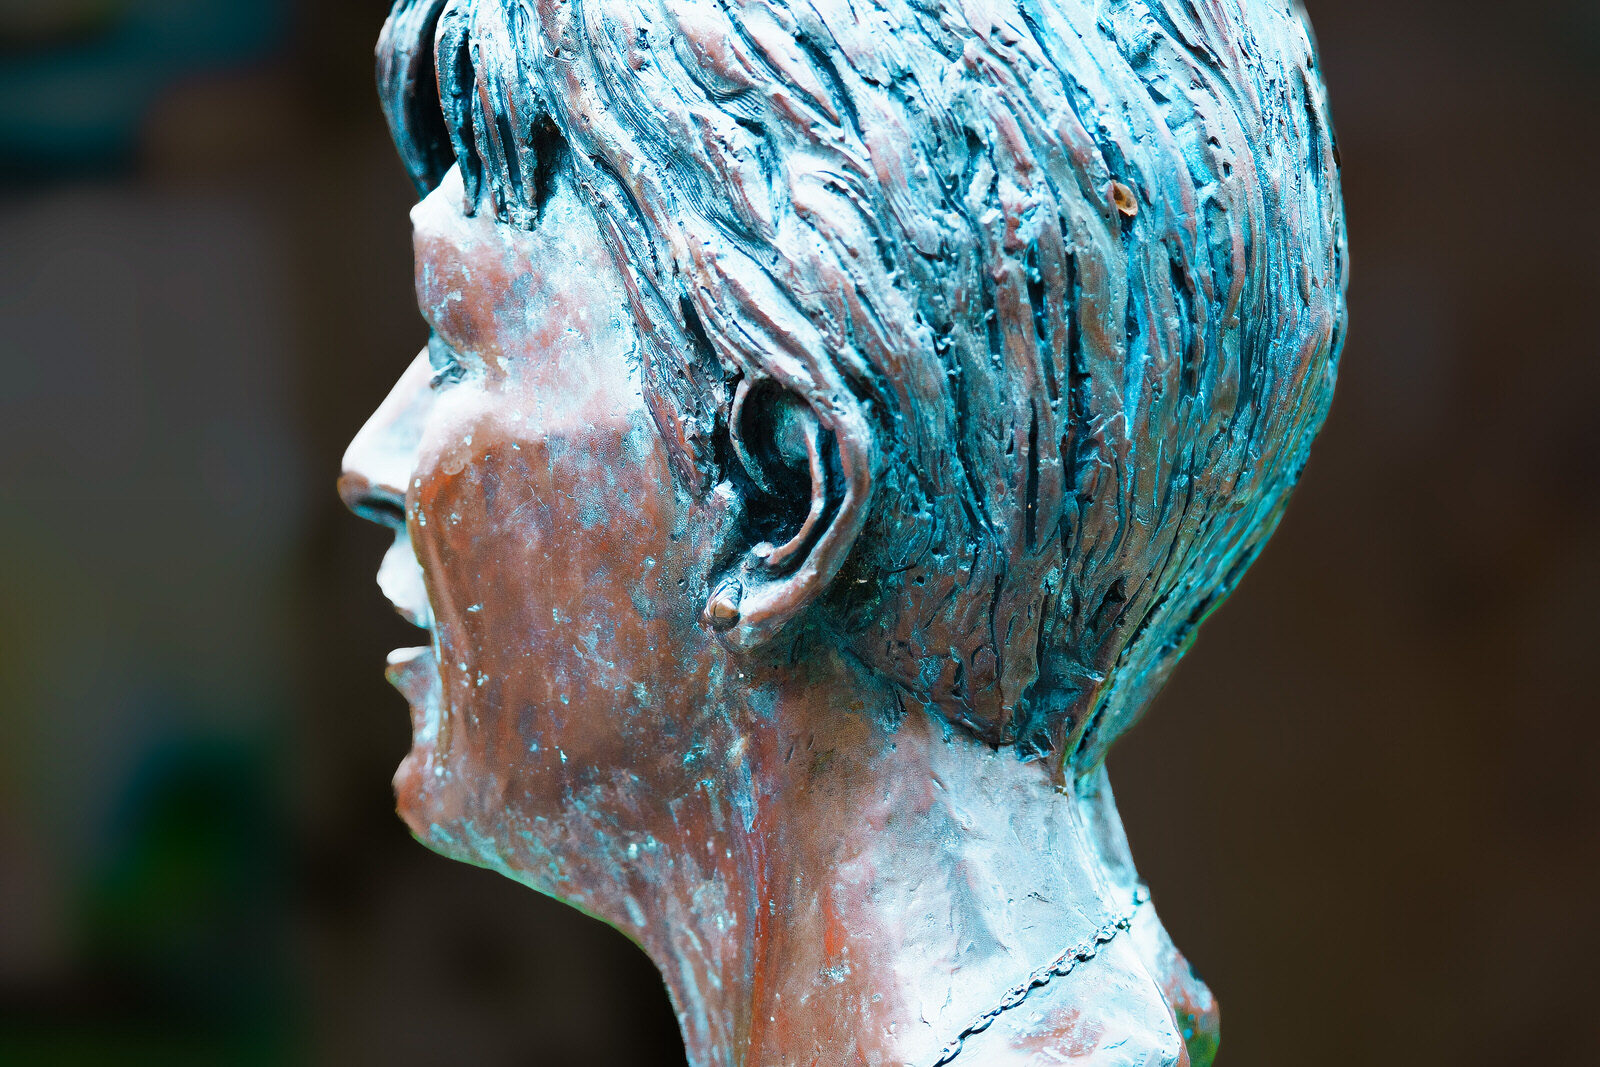 VERONICA GUERIN MEMORIAL [I USE THIS SCULPTURE AT DUBLIN CASTLE AS A REFERENCE]-229866-1